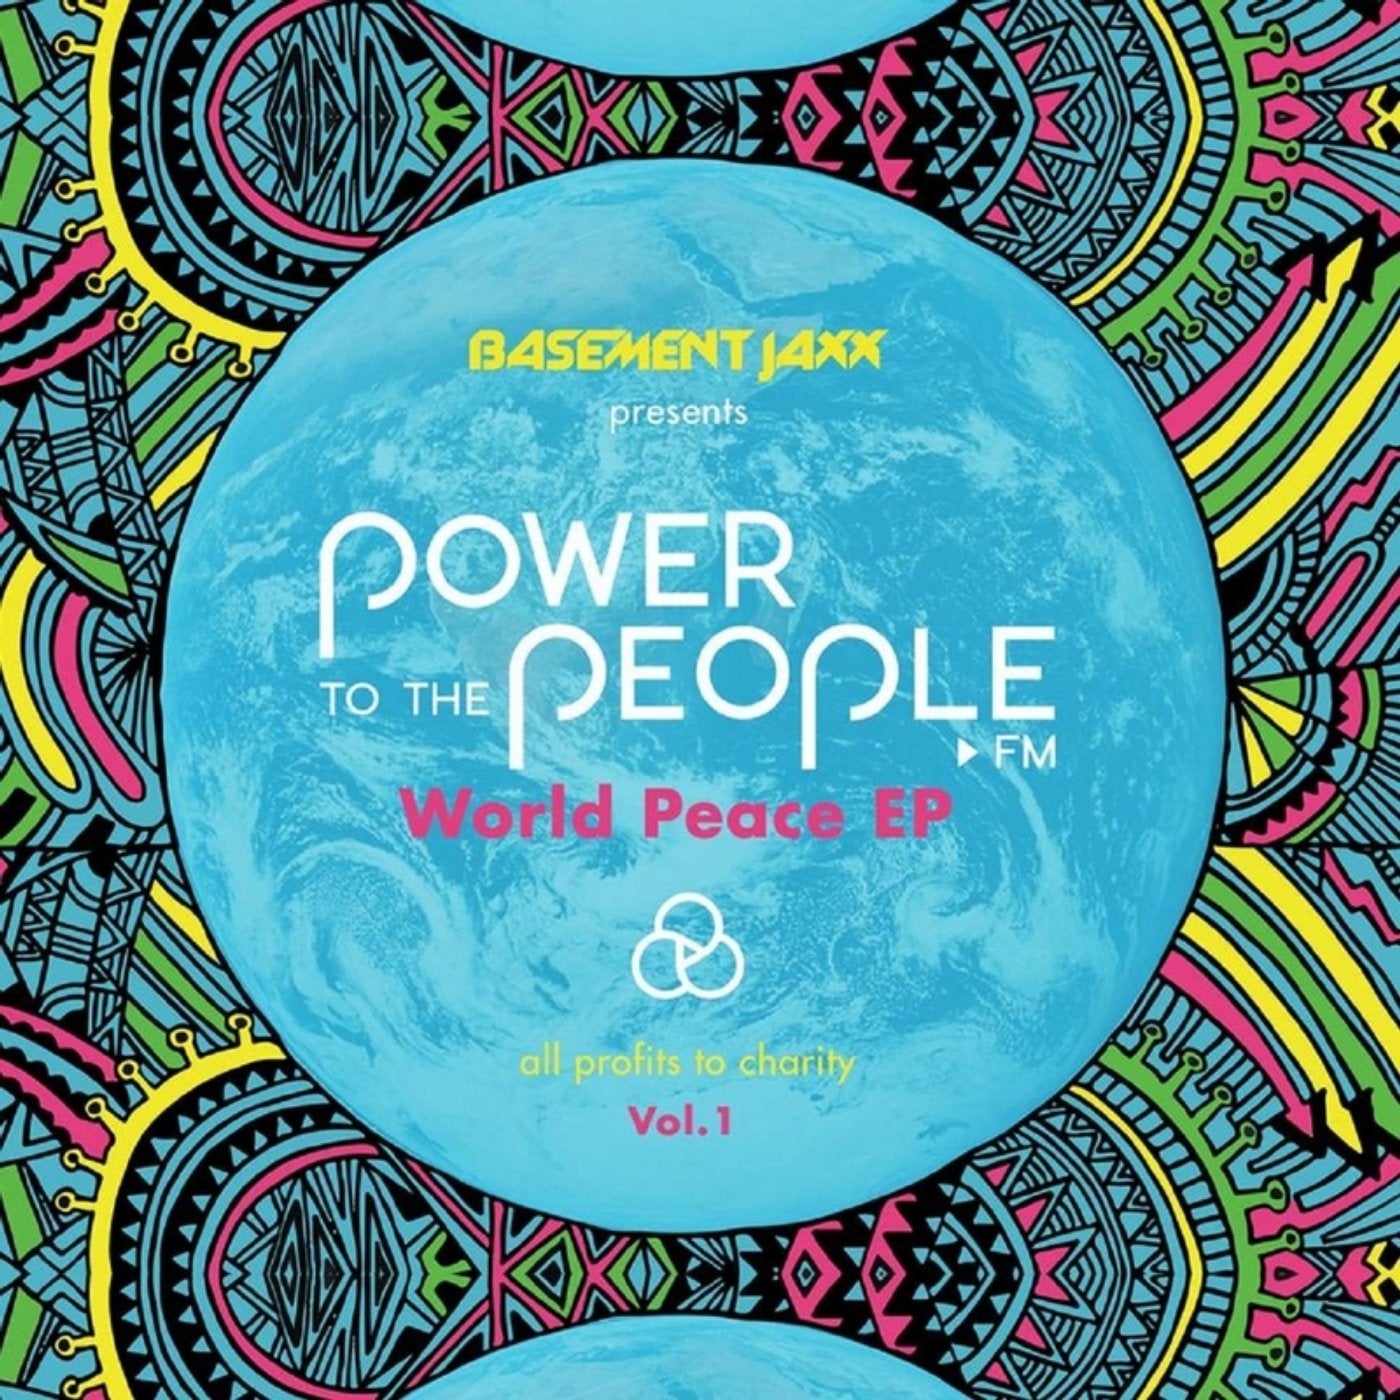 Power to the People.FM World Peace